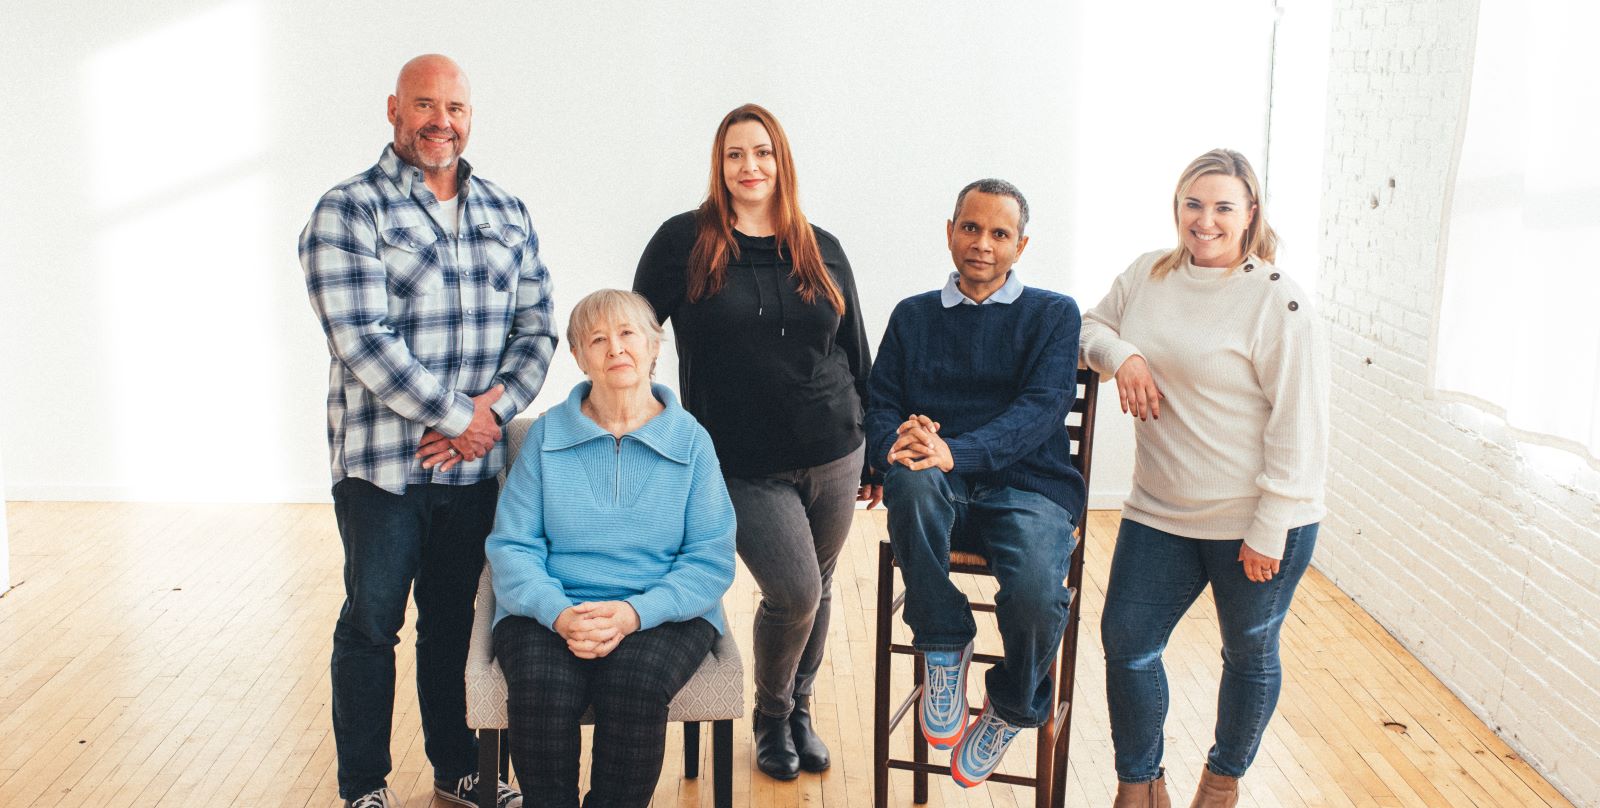 Five colon cancer survivors, two men and three women look at the camera